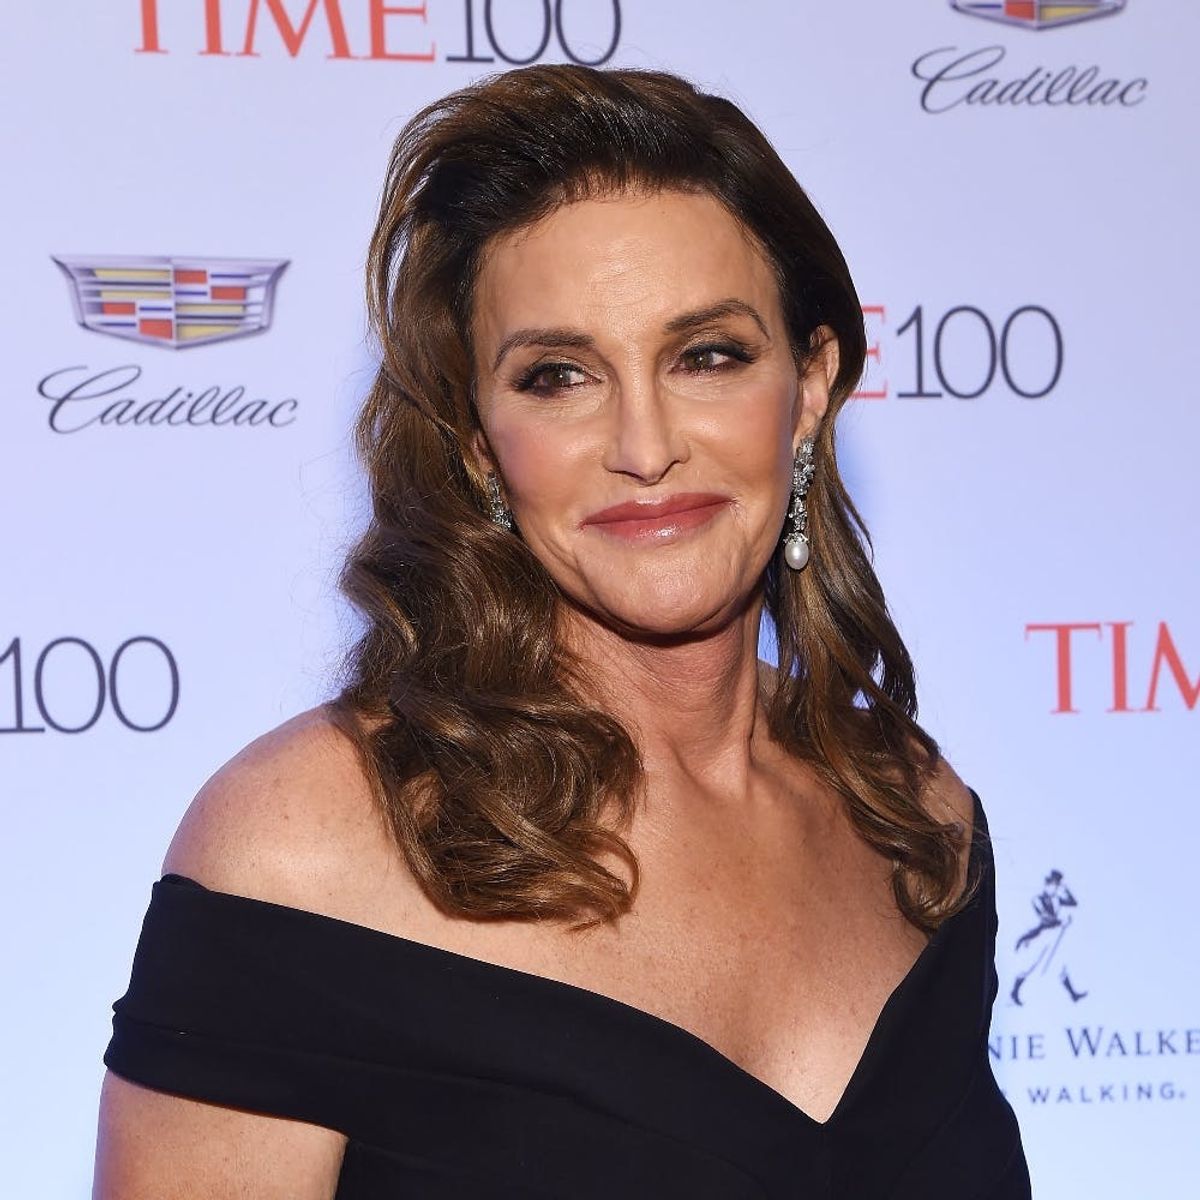 Caitlyn Jenner Will Be Wearing a Gold Medal + American Flag in Sports Illustrated